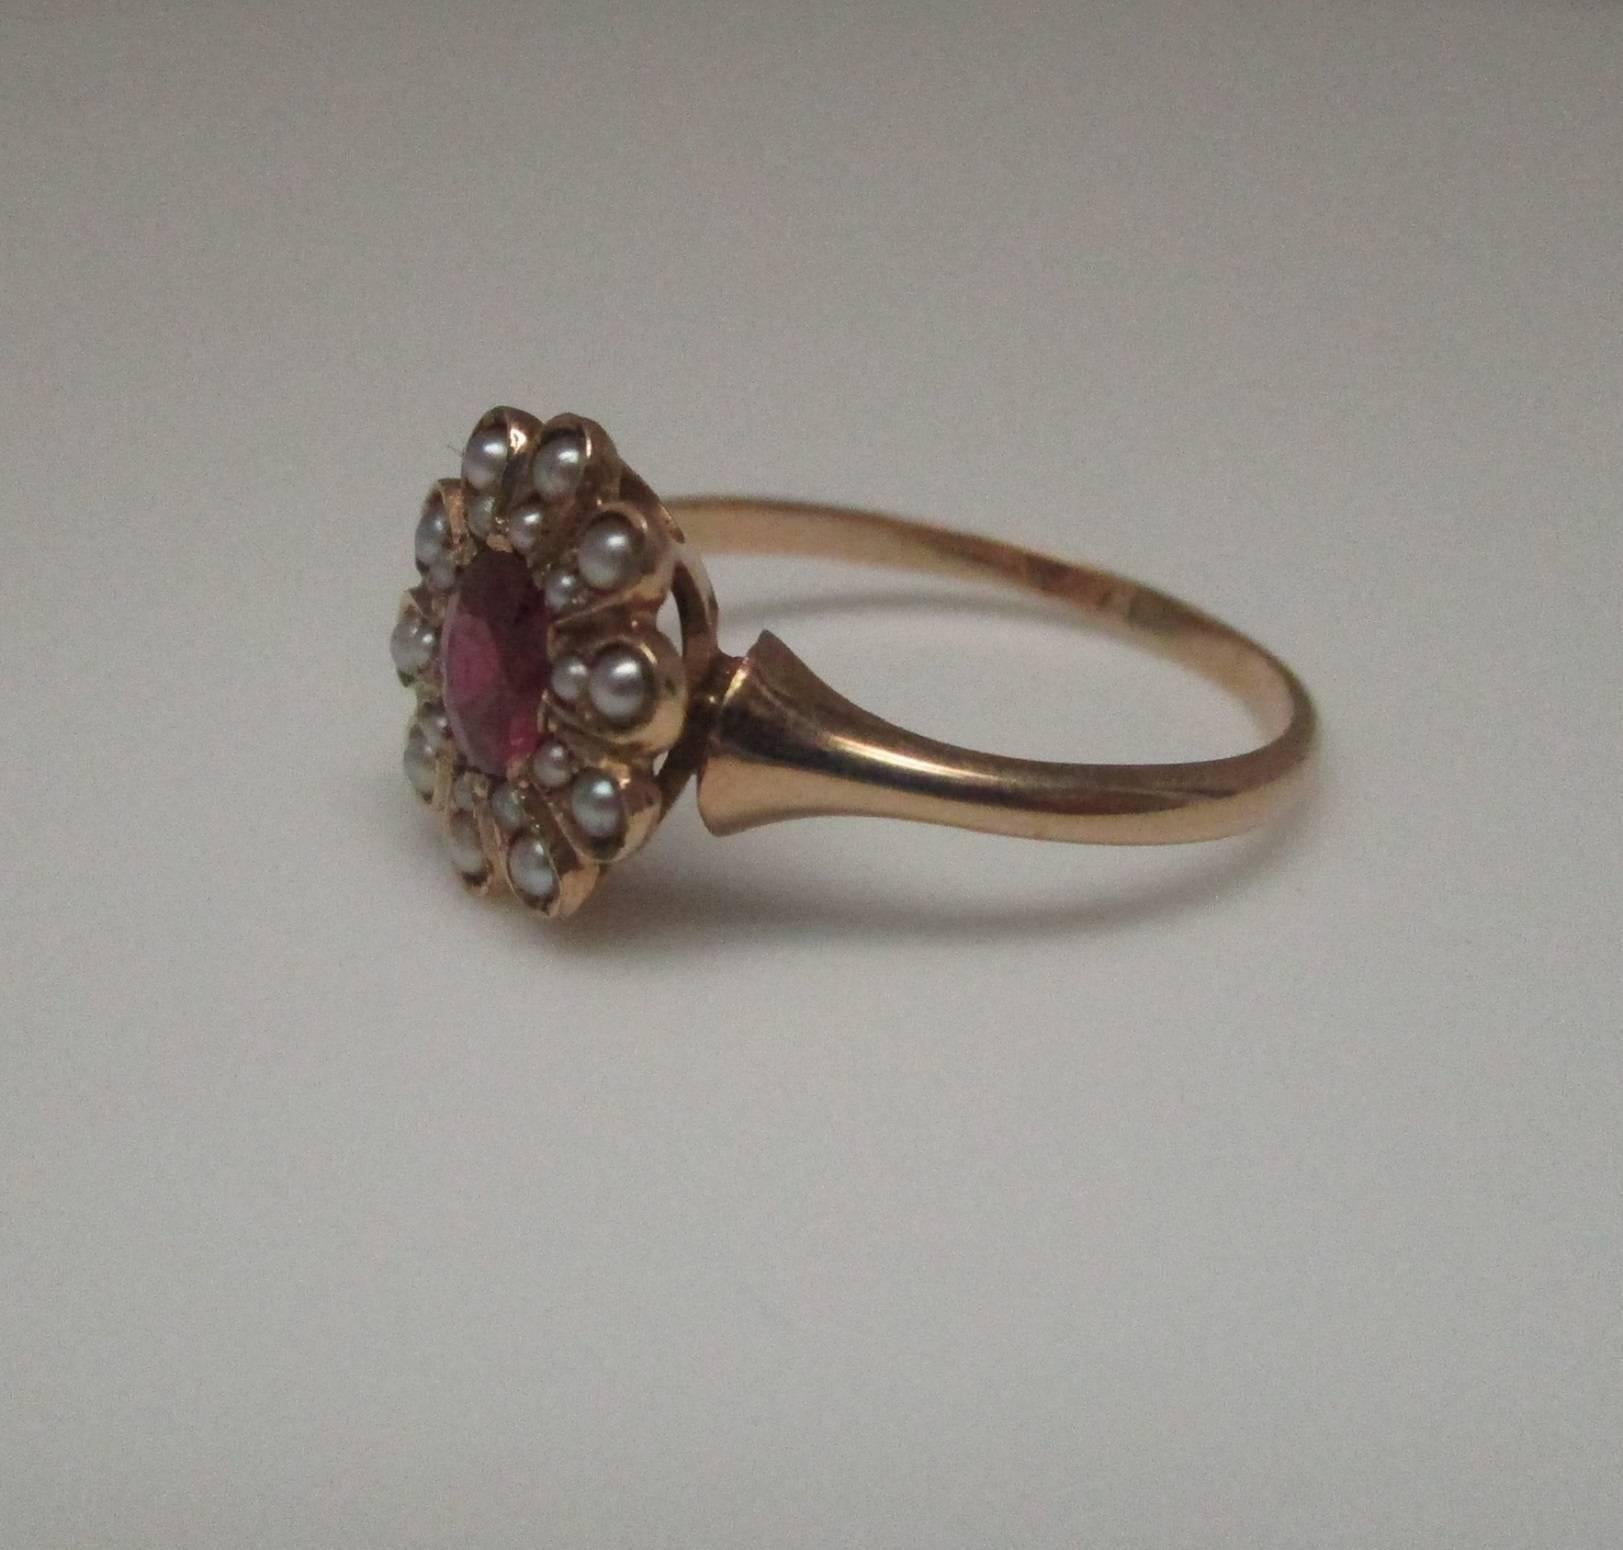 This ring is stunning, the 0.60 carat ruby is a lively red and the seed pearls are in pristine condition. The 18 karat gold means it will you will have this ring for a life time. It sits close to the hand, so it is very comfortable to wear.